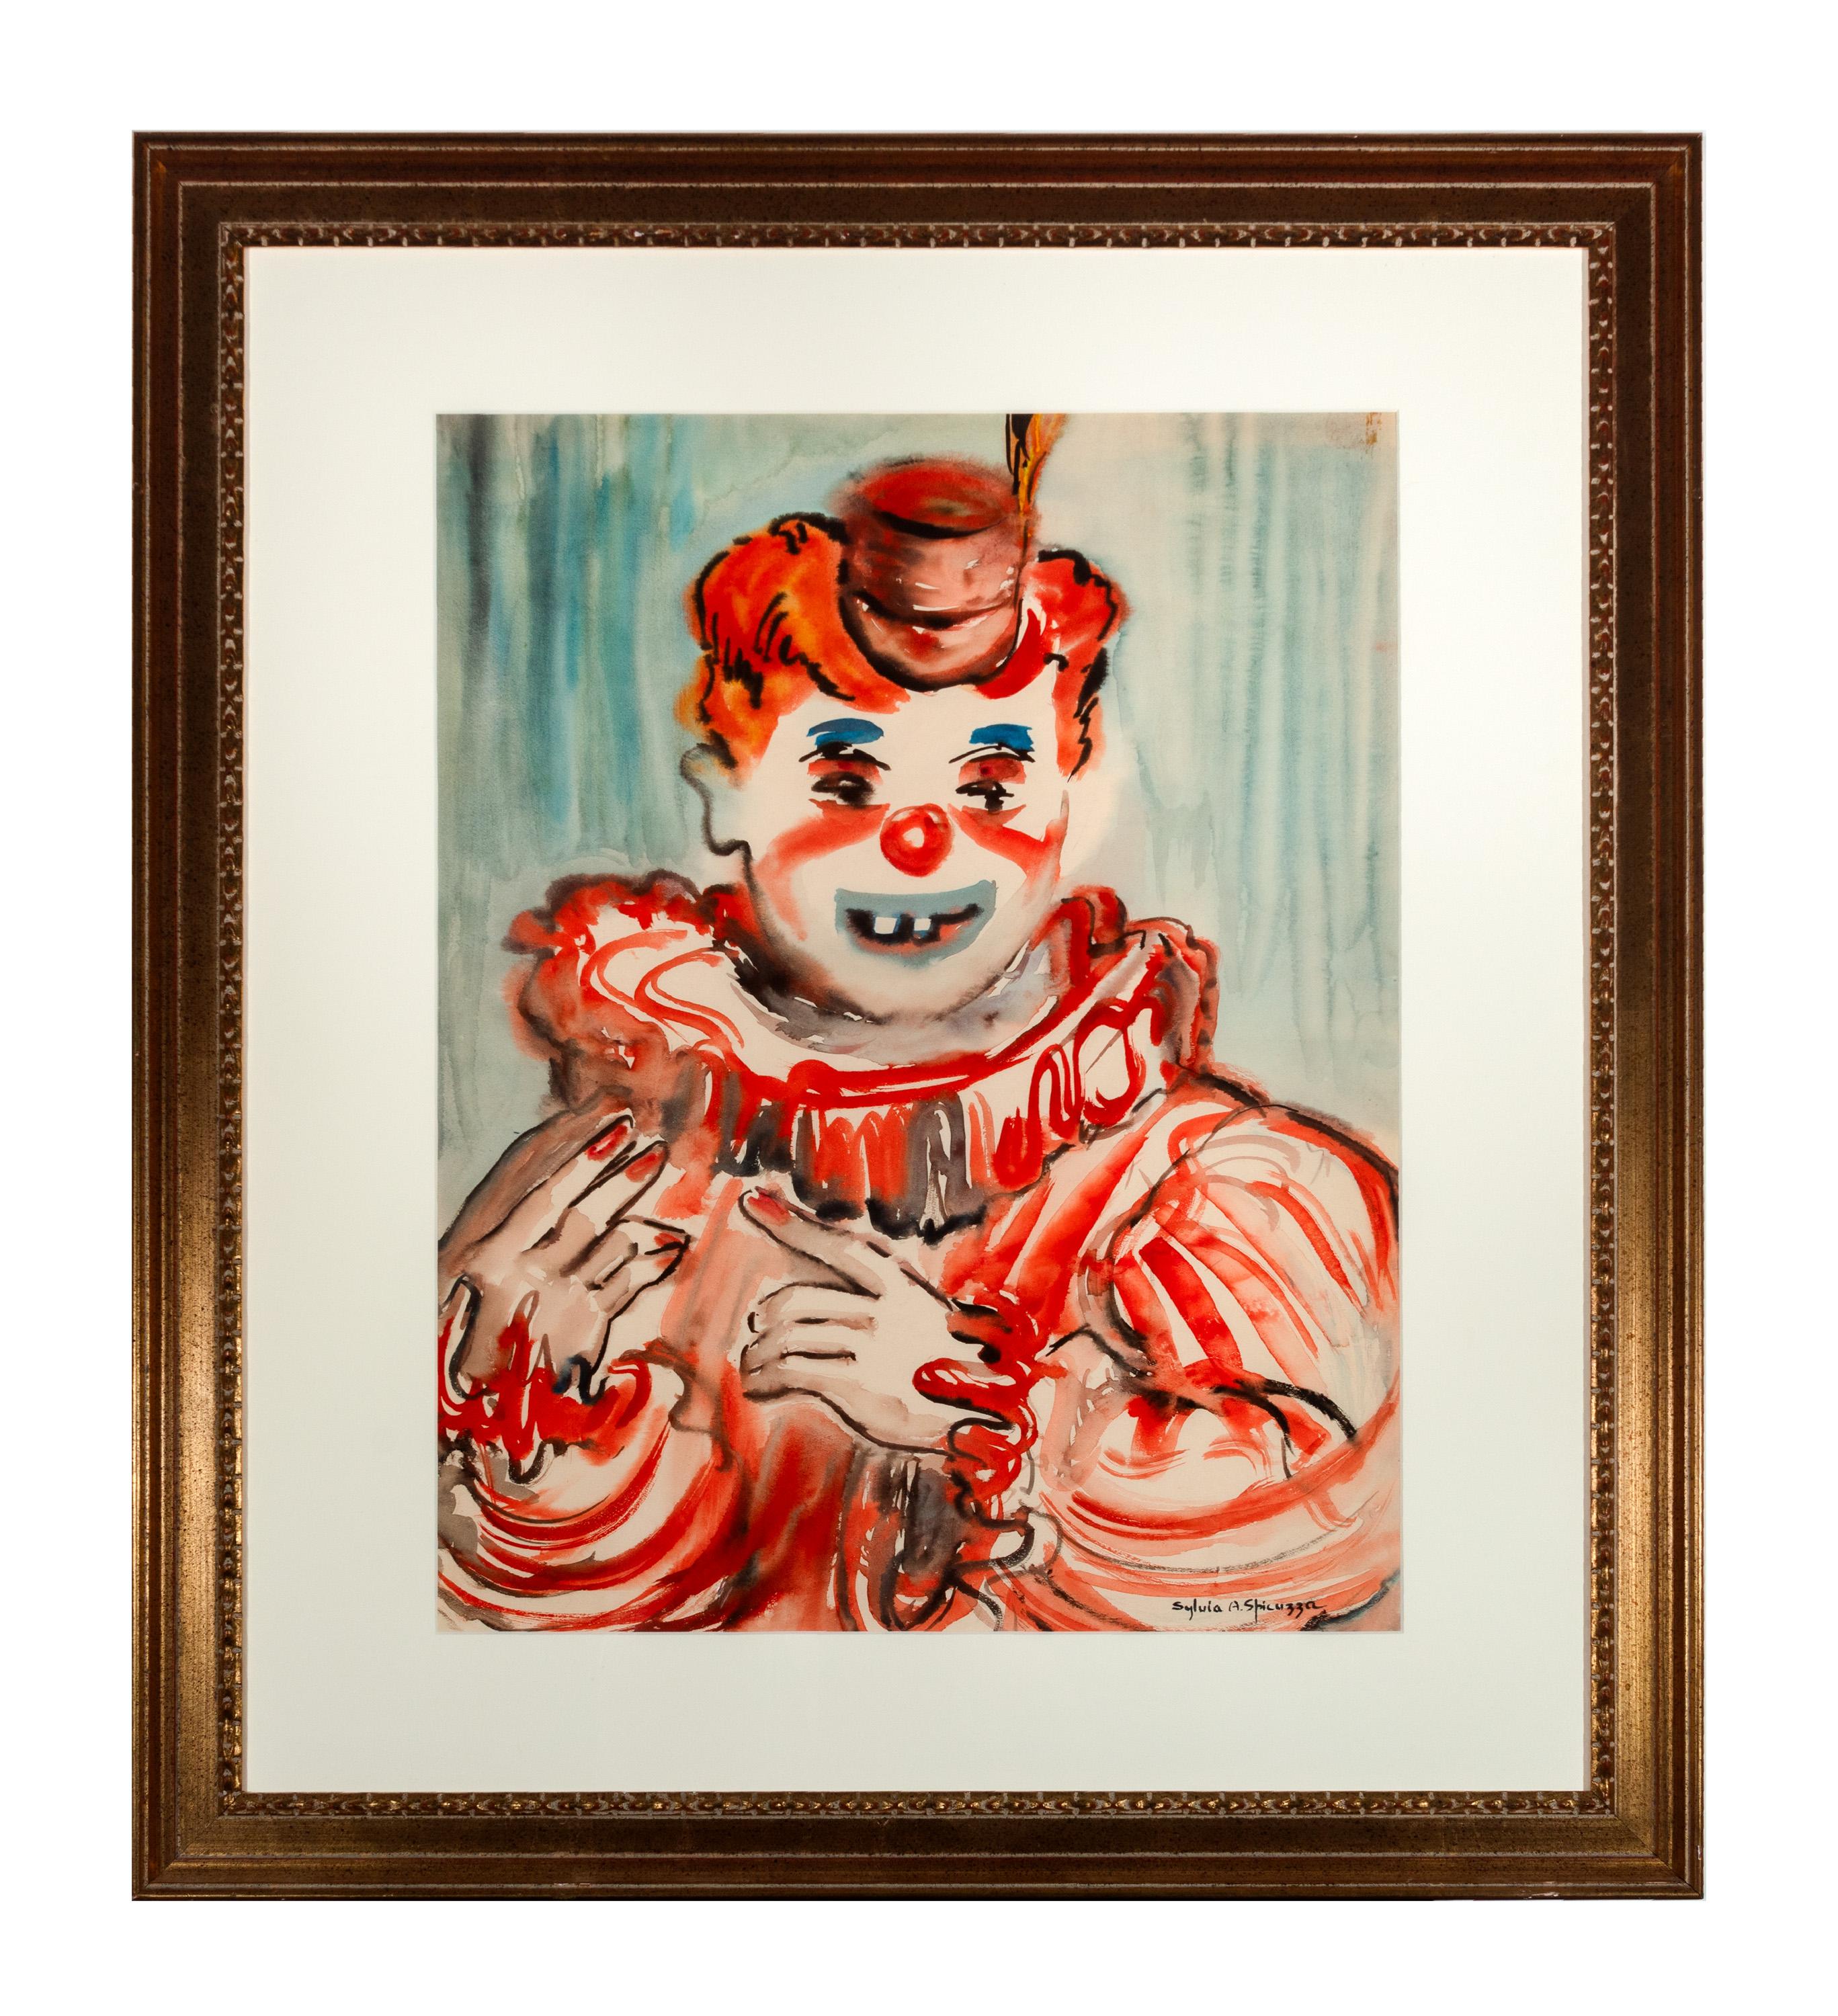 Sylvia Spicuzza Portrait - 'Clown Close Up' Watercolor, signed in ink lower right